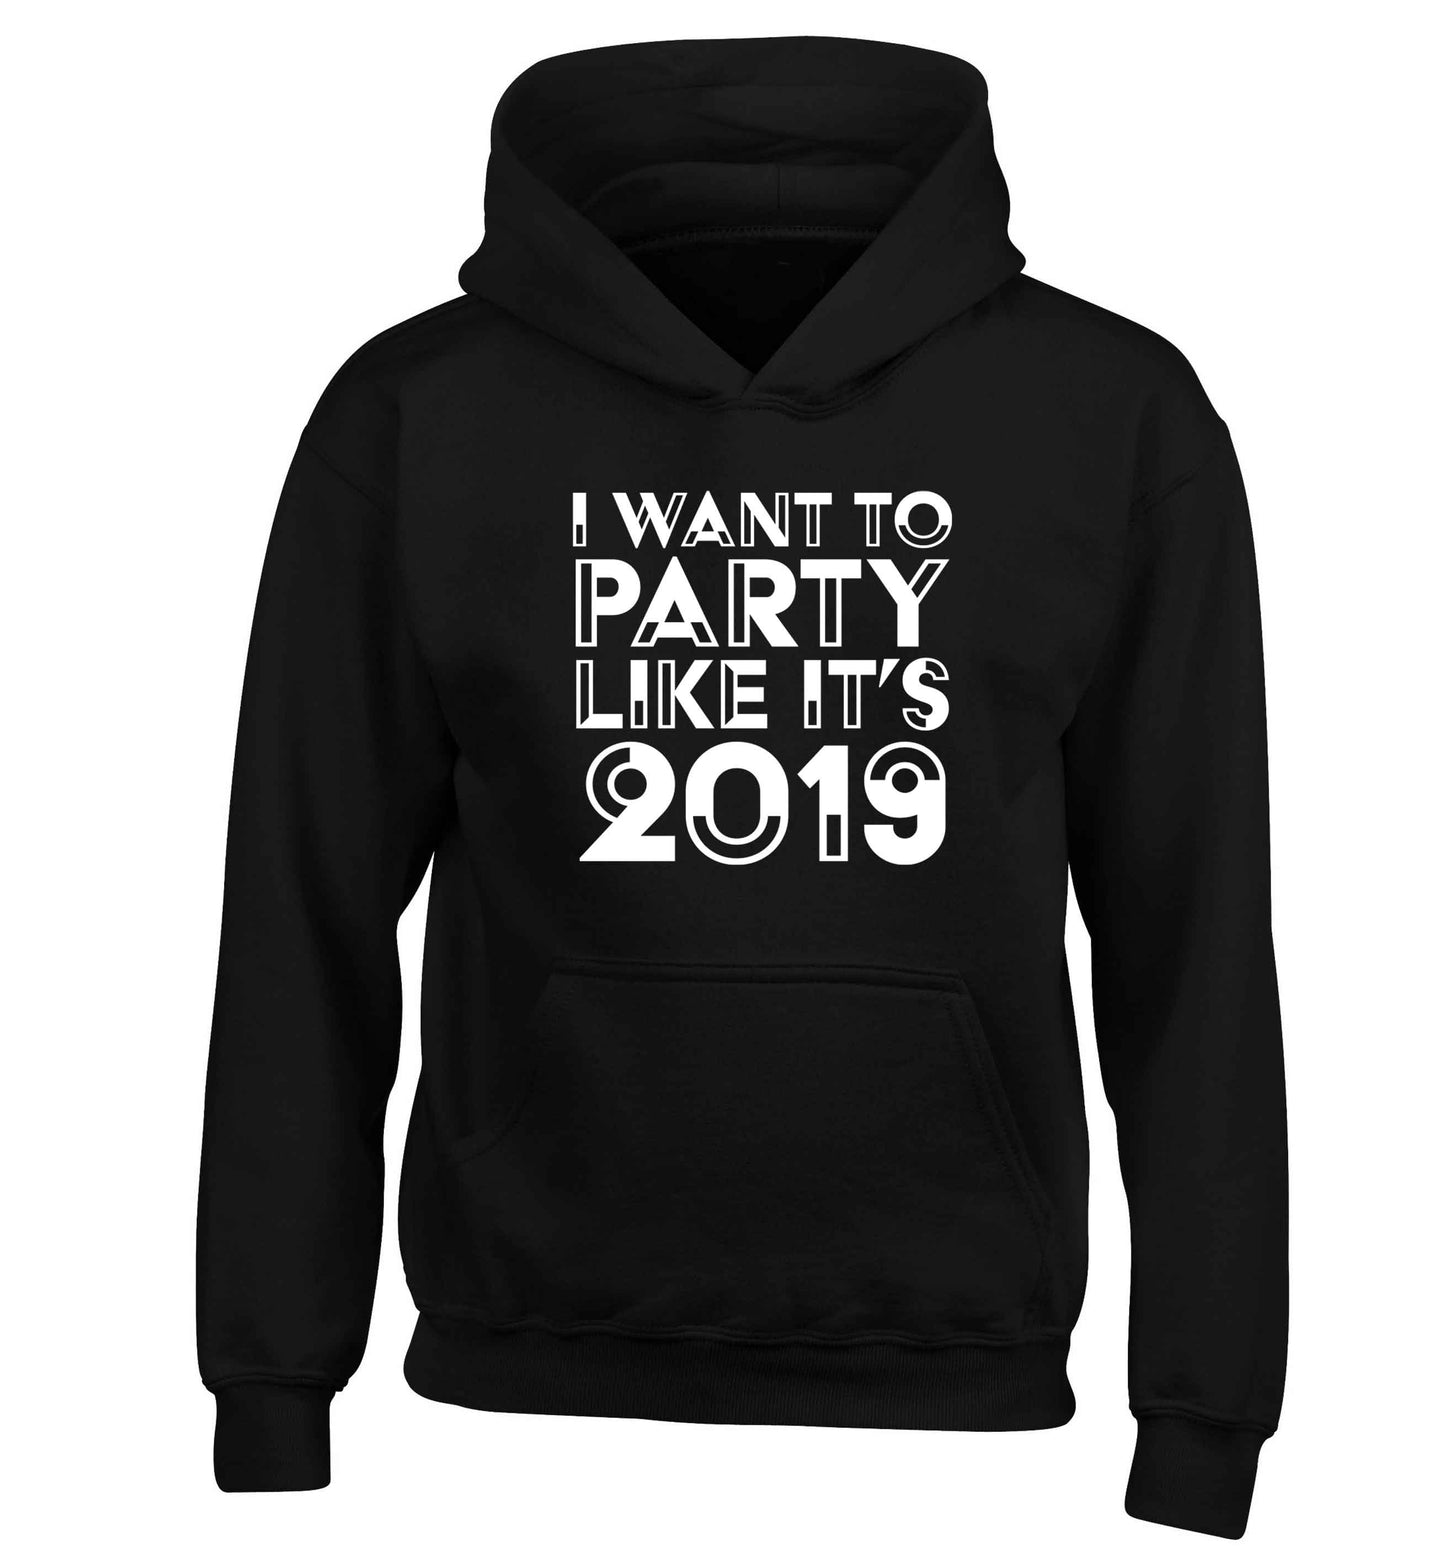 I want to party like it's 2019 children's black hoodie 12-13 Years